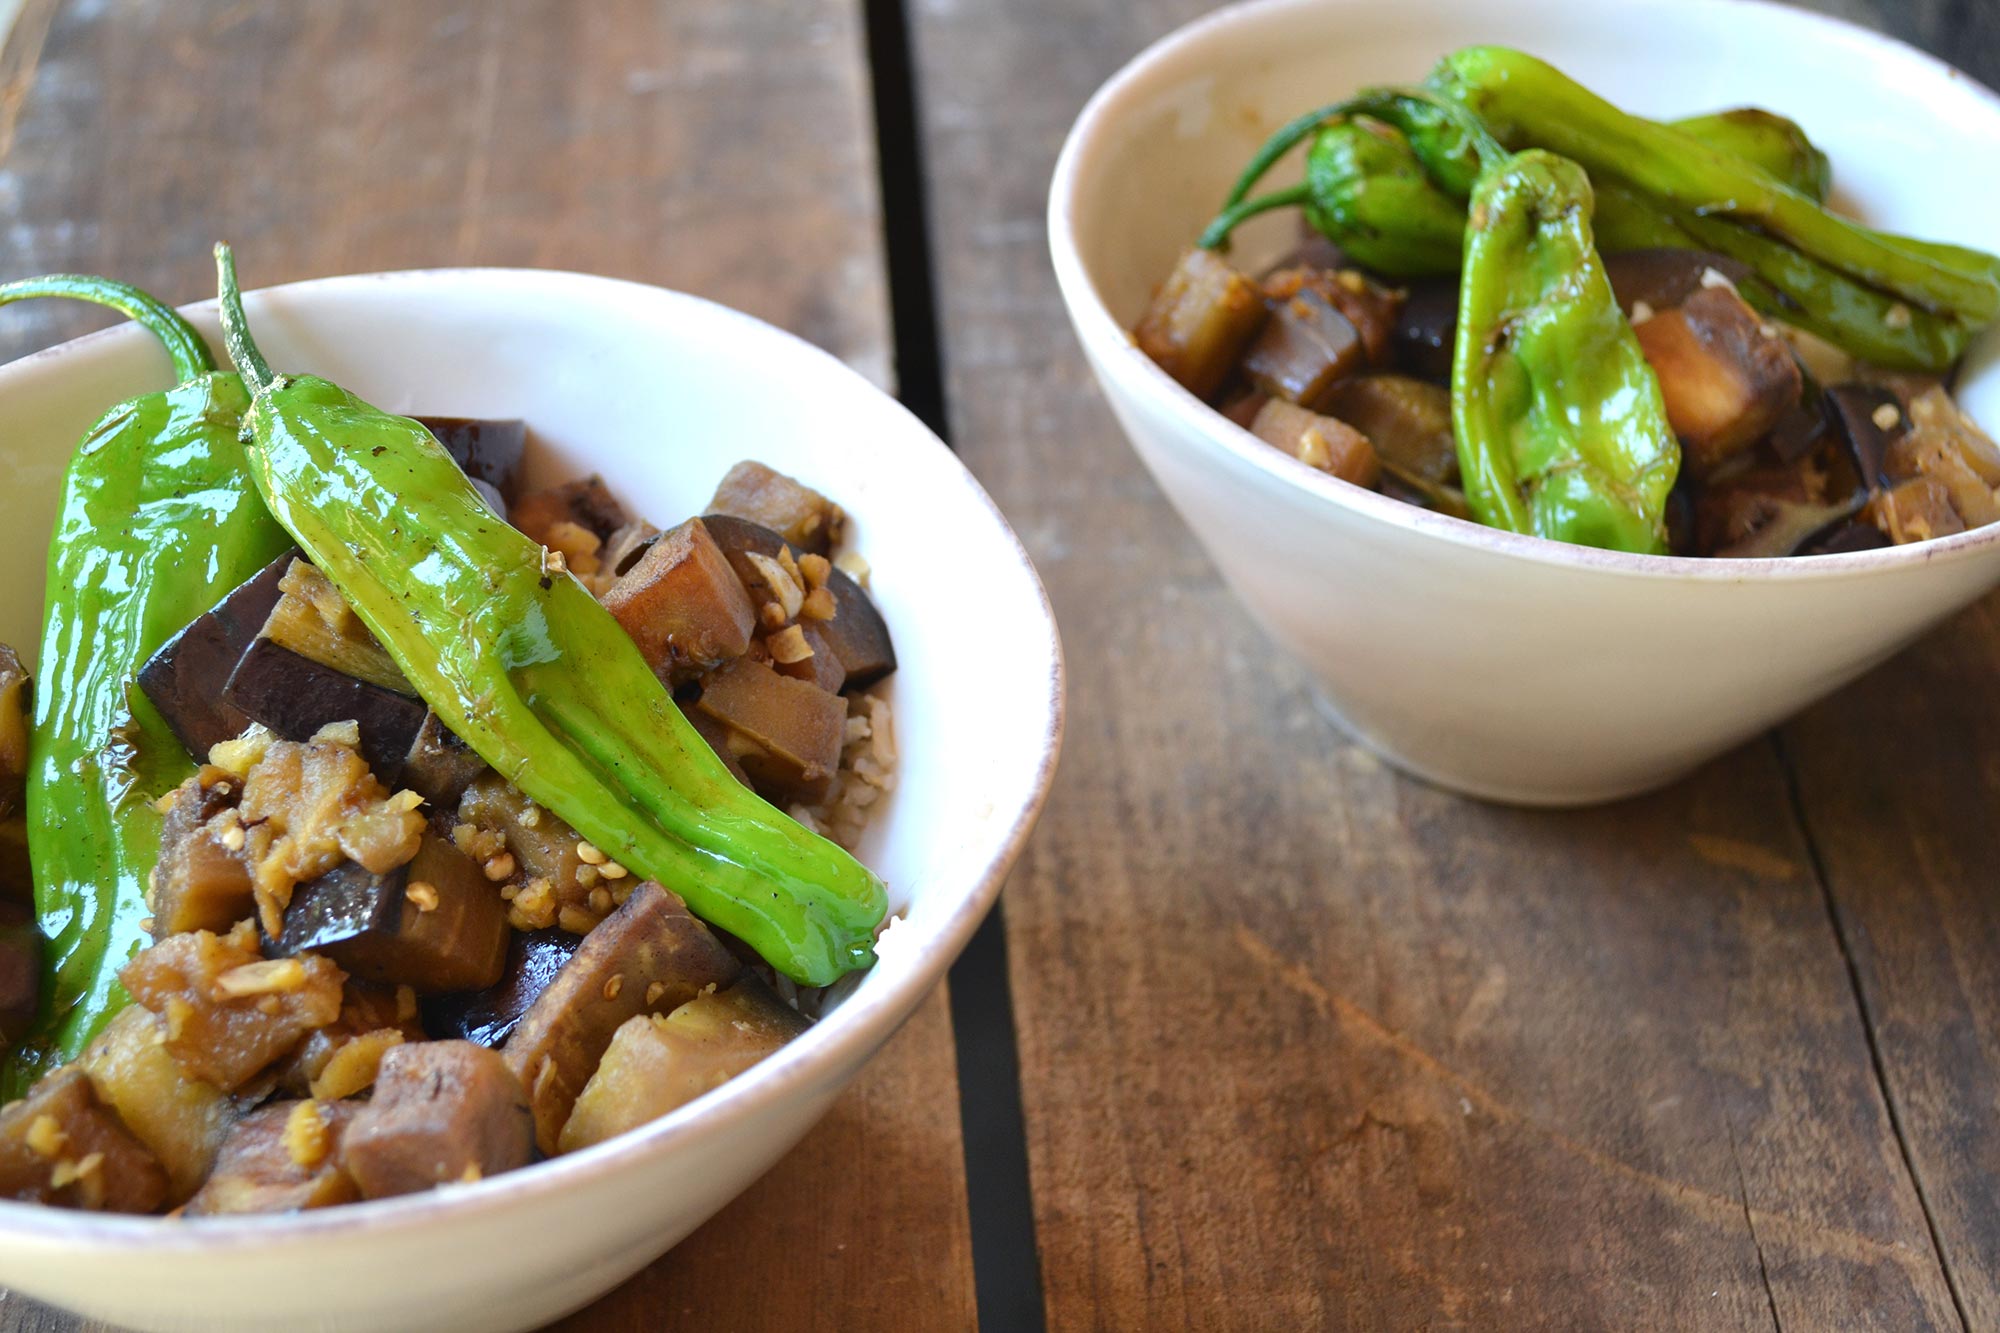 Eggplant Stir Fry with Shishito Peppers